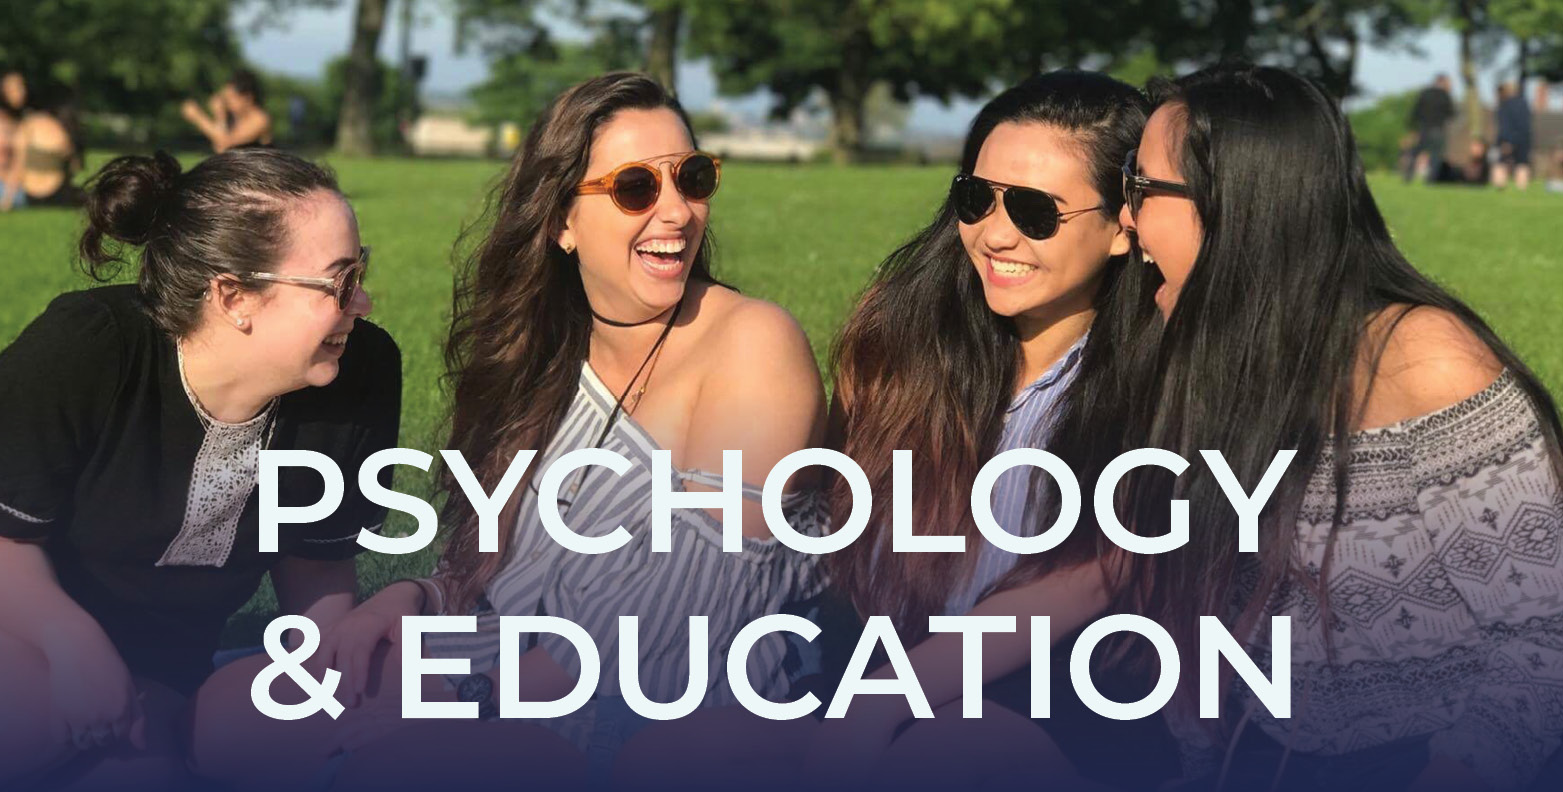 Four students laugh while seated on a lawn in Leeds, England. The words Psychology & Education are overlaid on the image.